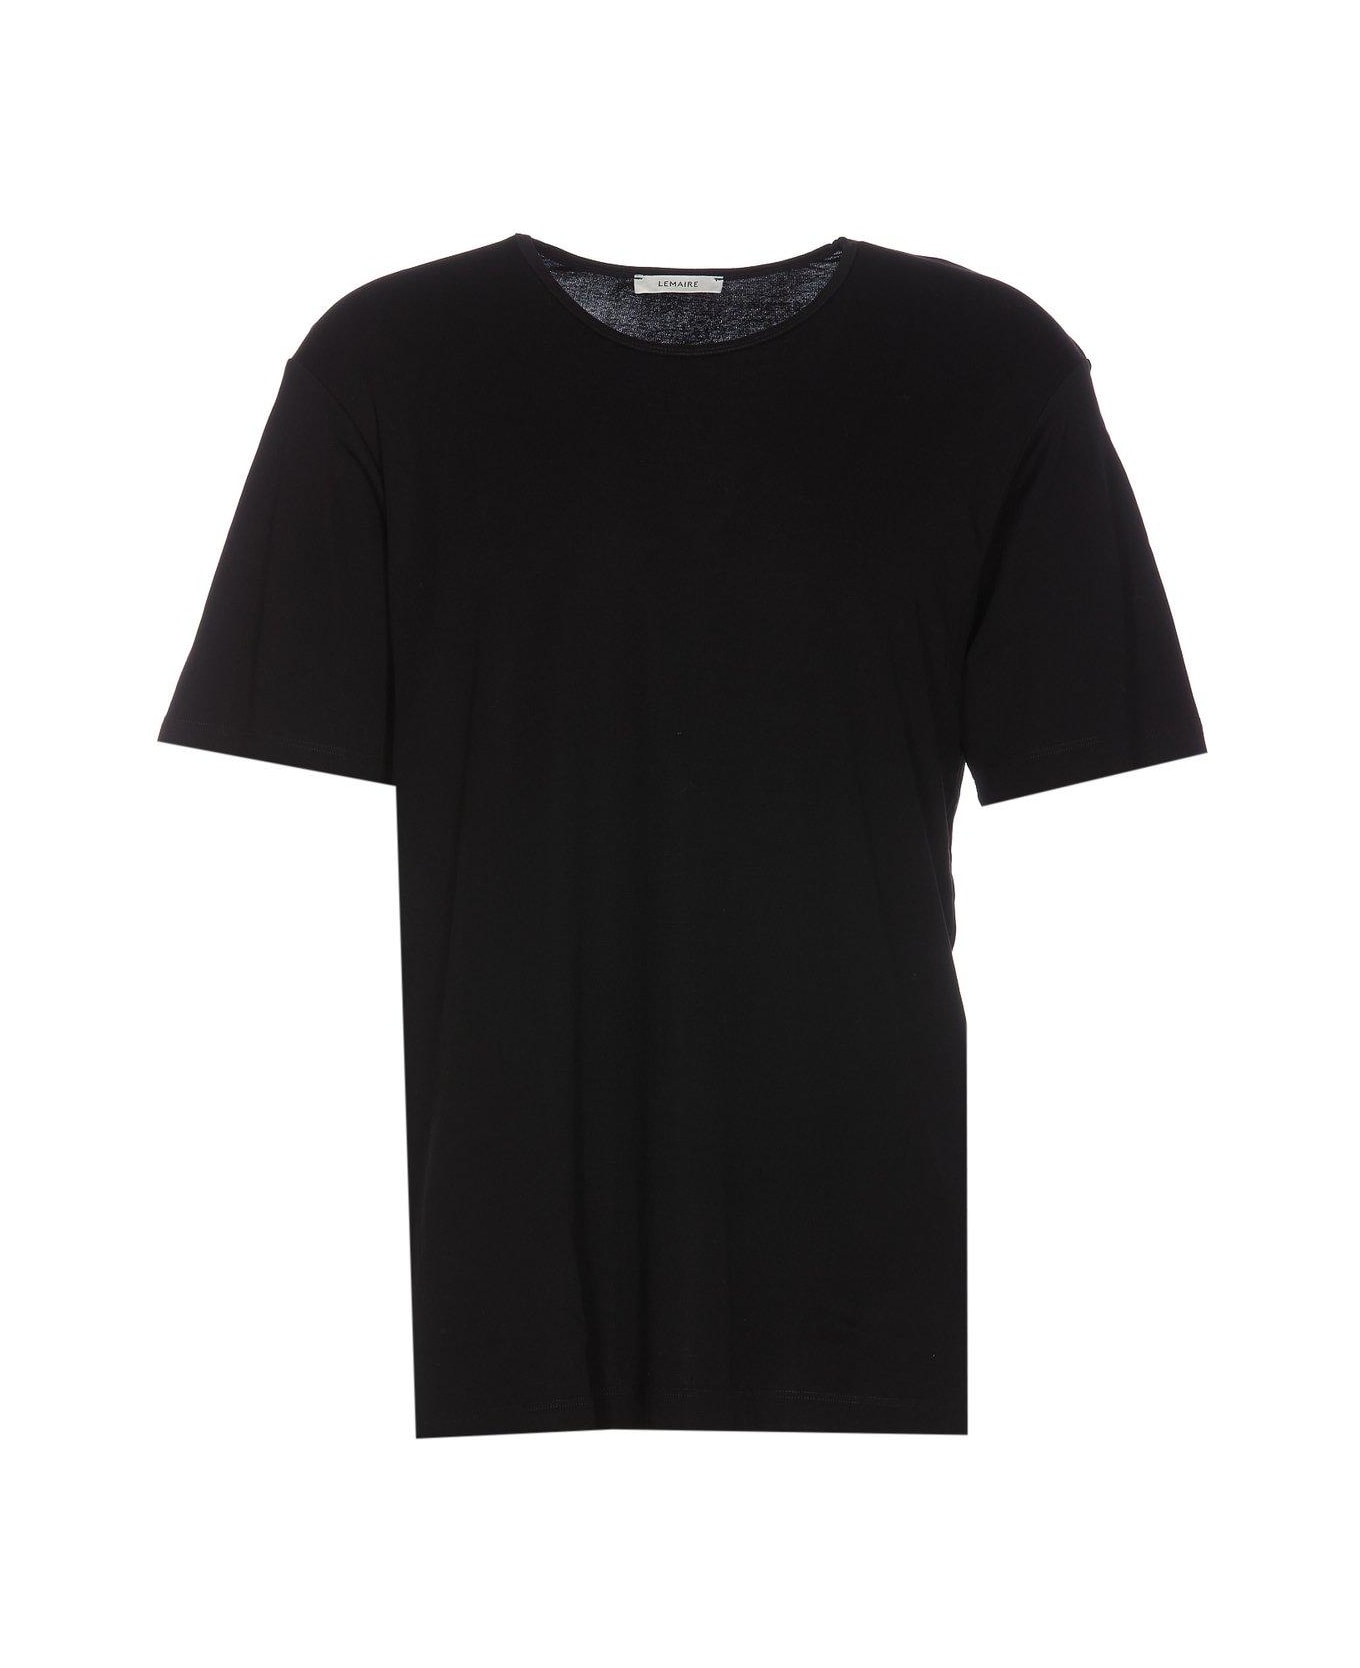 Lemaire Relaxed Fit Crewneck T-shirt - BLACK